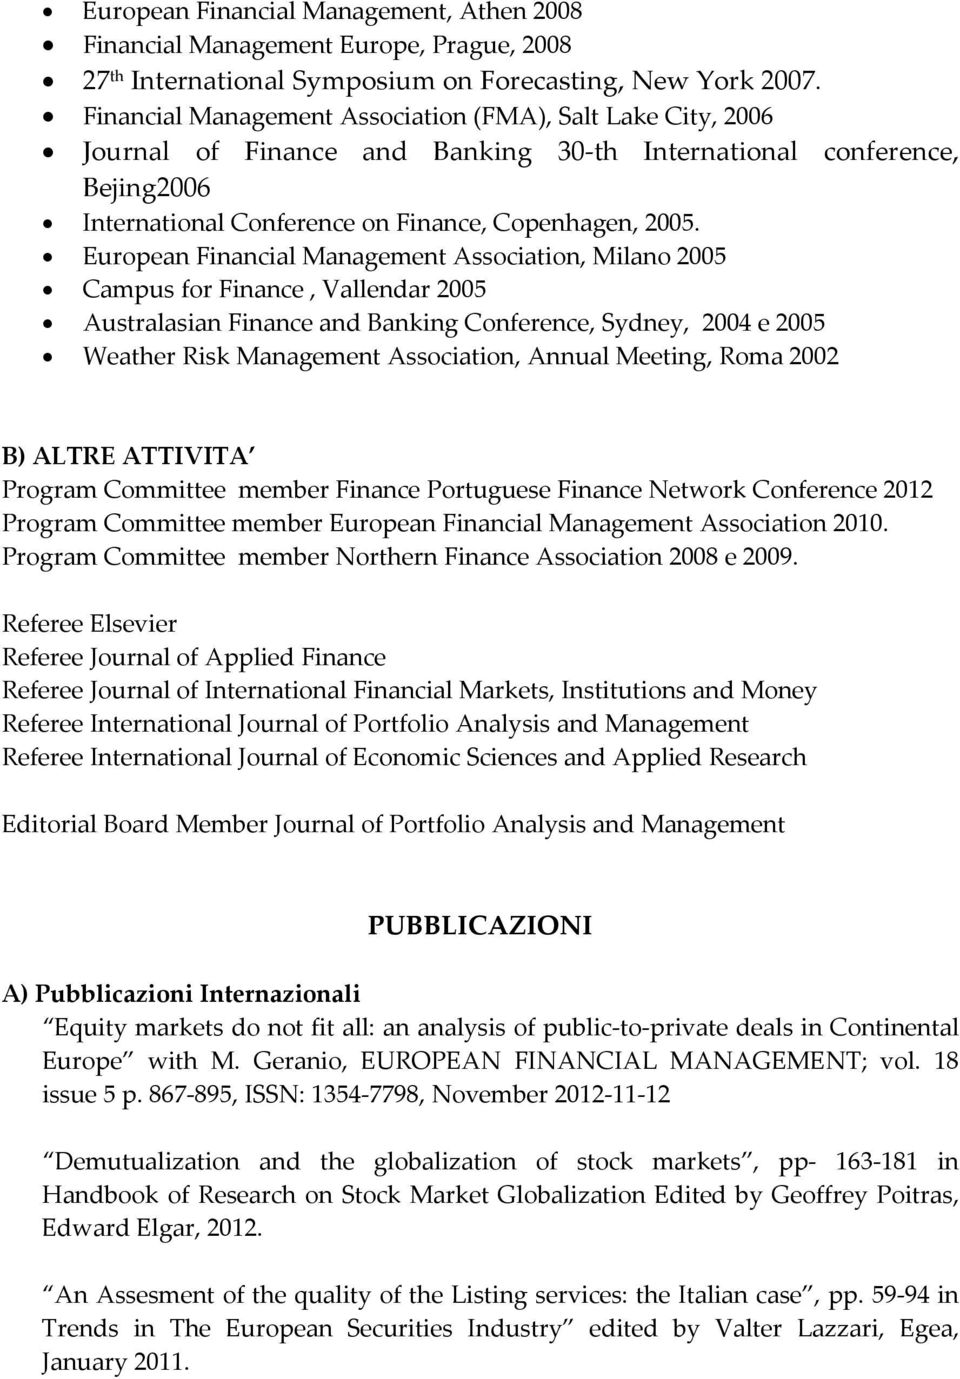 European Financial Management Association, Milano 2005 Campus for Finance, Vallendar 2005 Australasian Finance and Banking Conference, Sydney, 2004 e 2005 Weather Risk Management Association, Annual